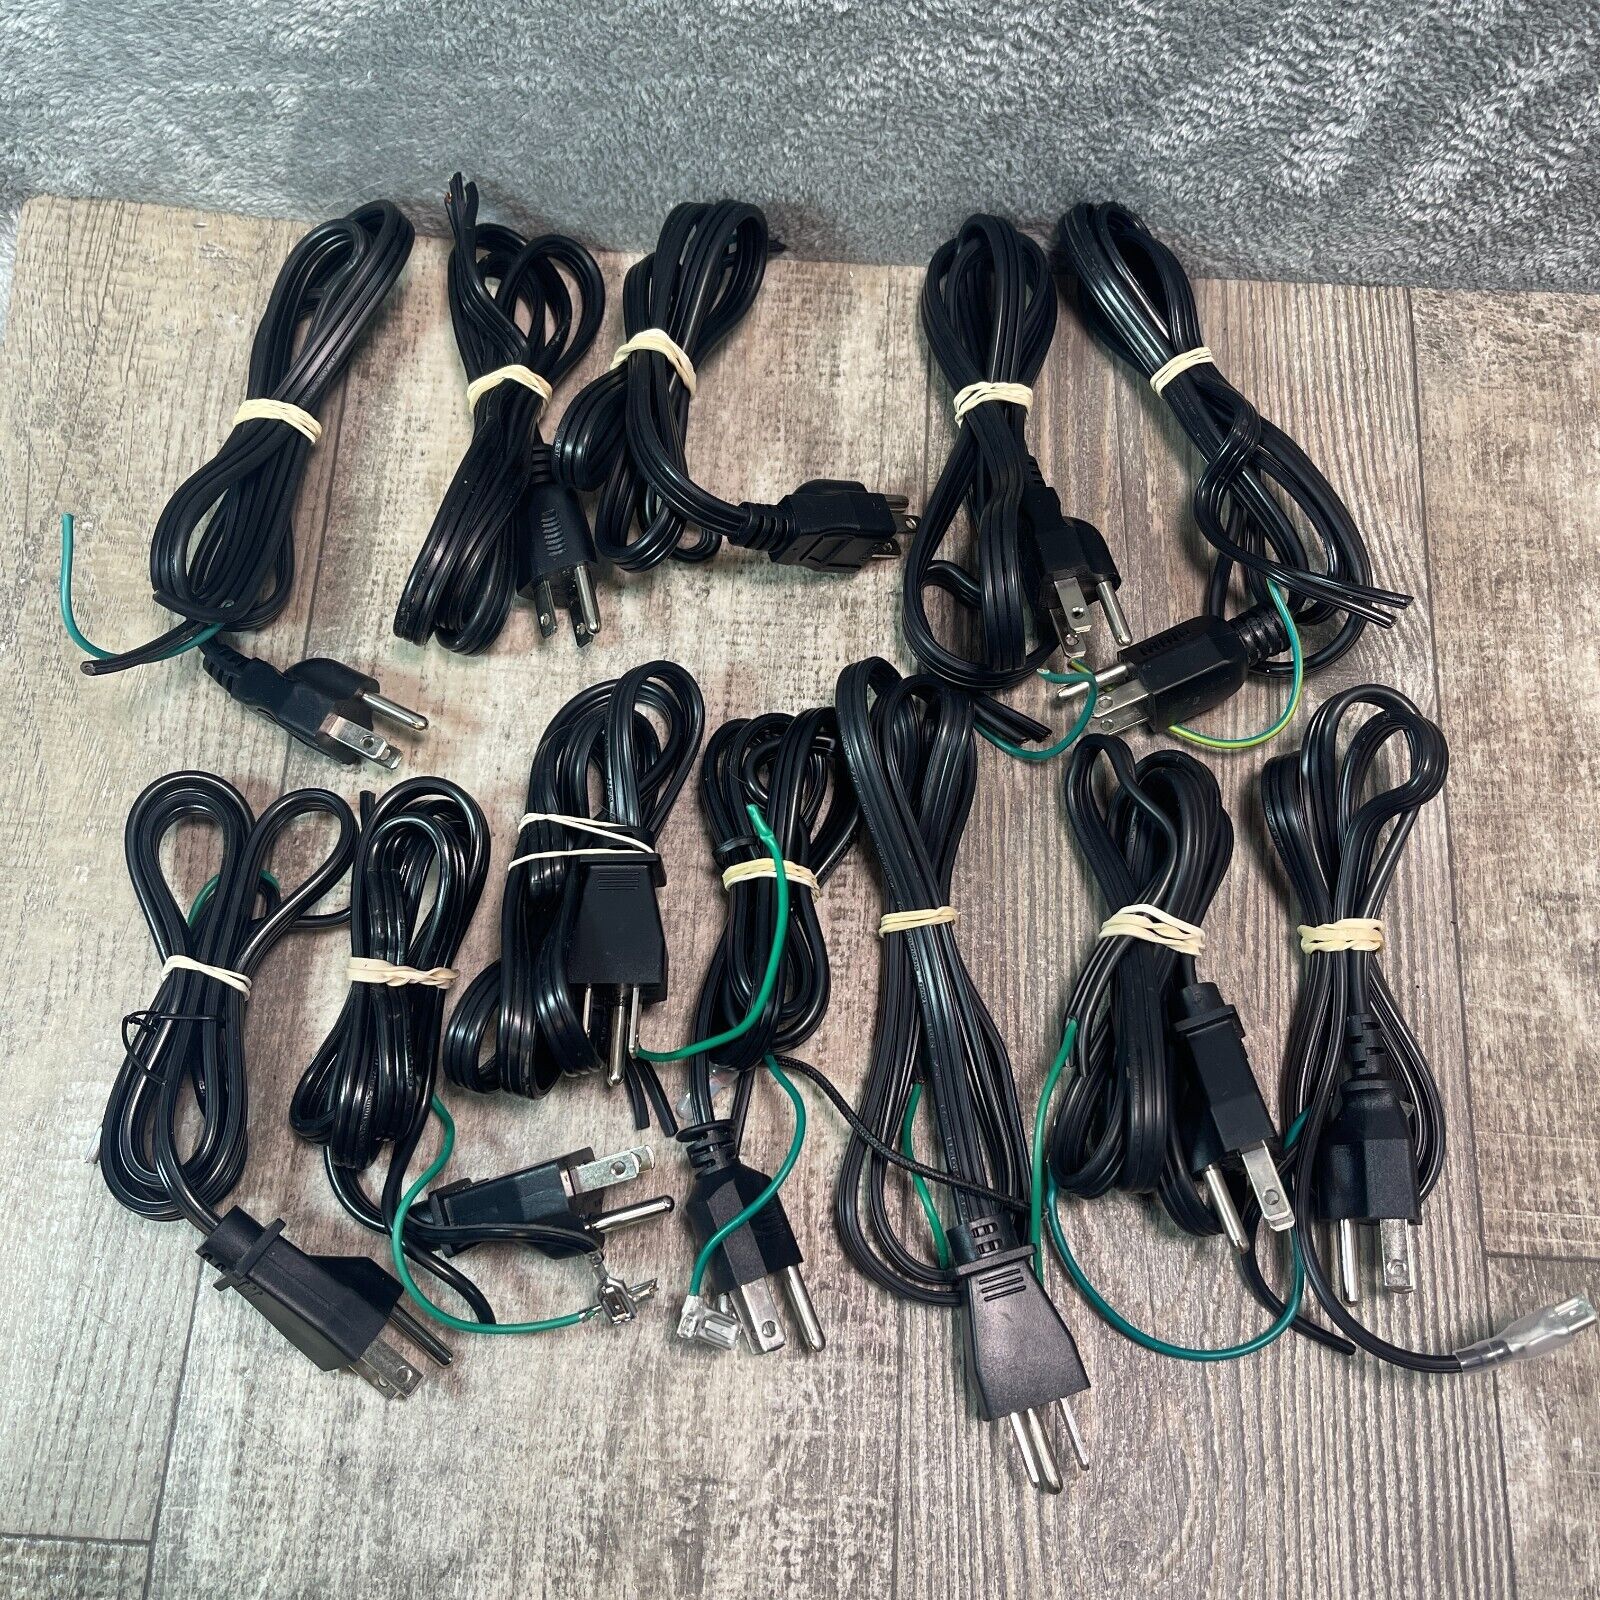 Keurig Coffee Maker Replacement Lot of 12 Cables Mixed models - $18.99